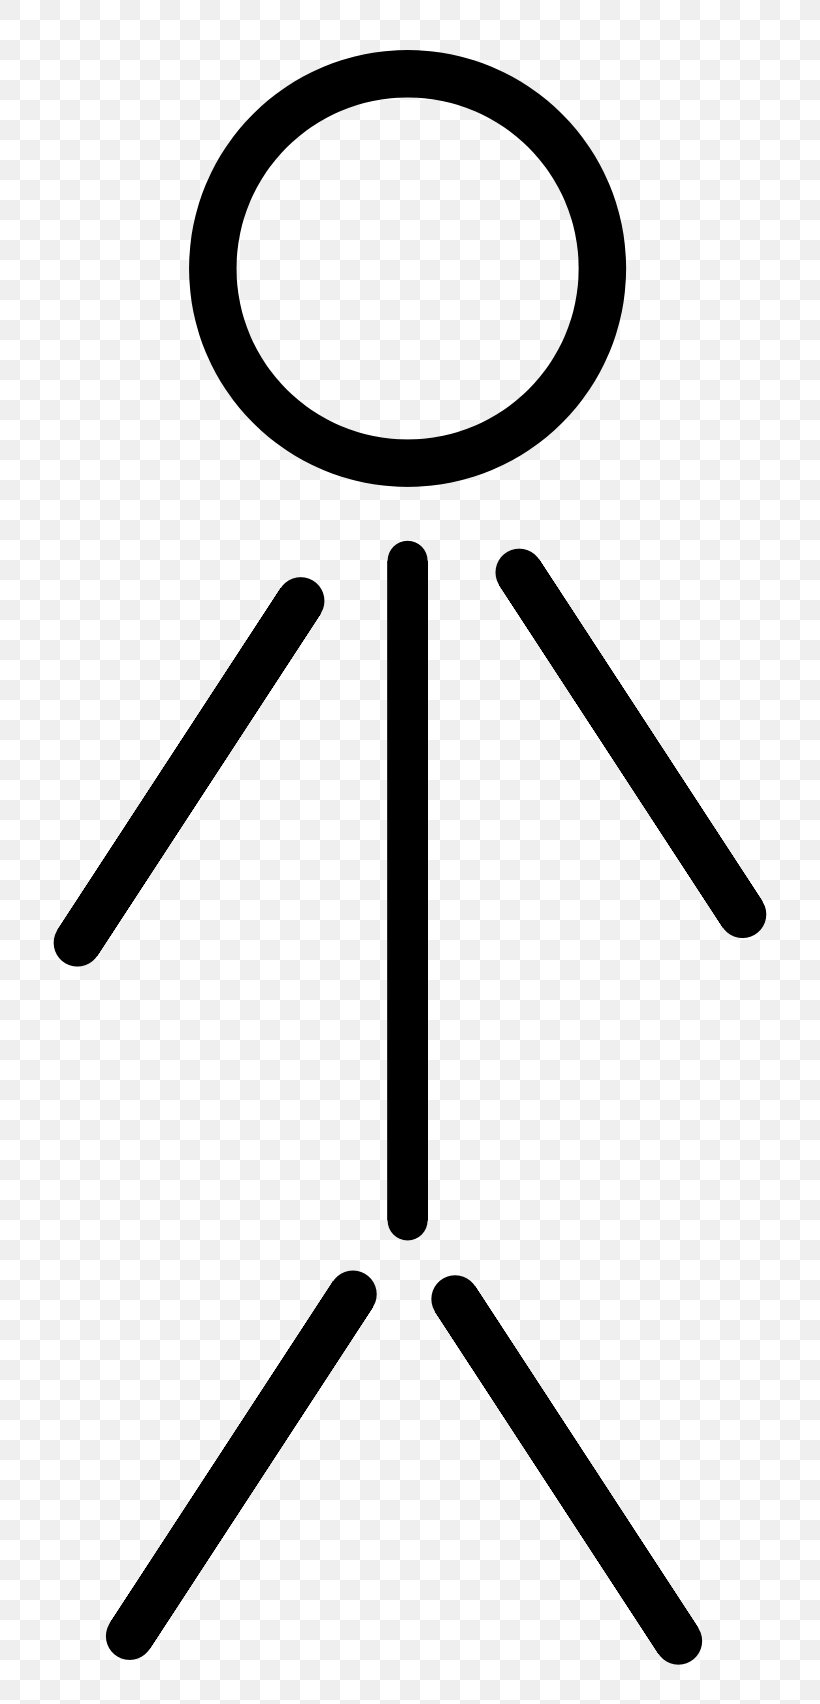 Stick Figure Free Content Clip Art, PNG, 800x1704px, Stick Figure, Black And White, Drawing, Free Content, Microsoft Office Download Free